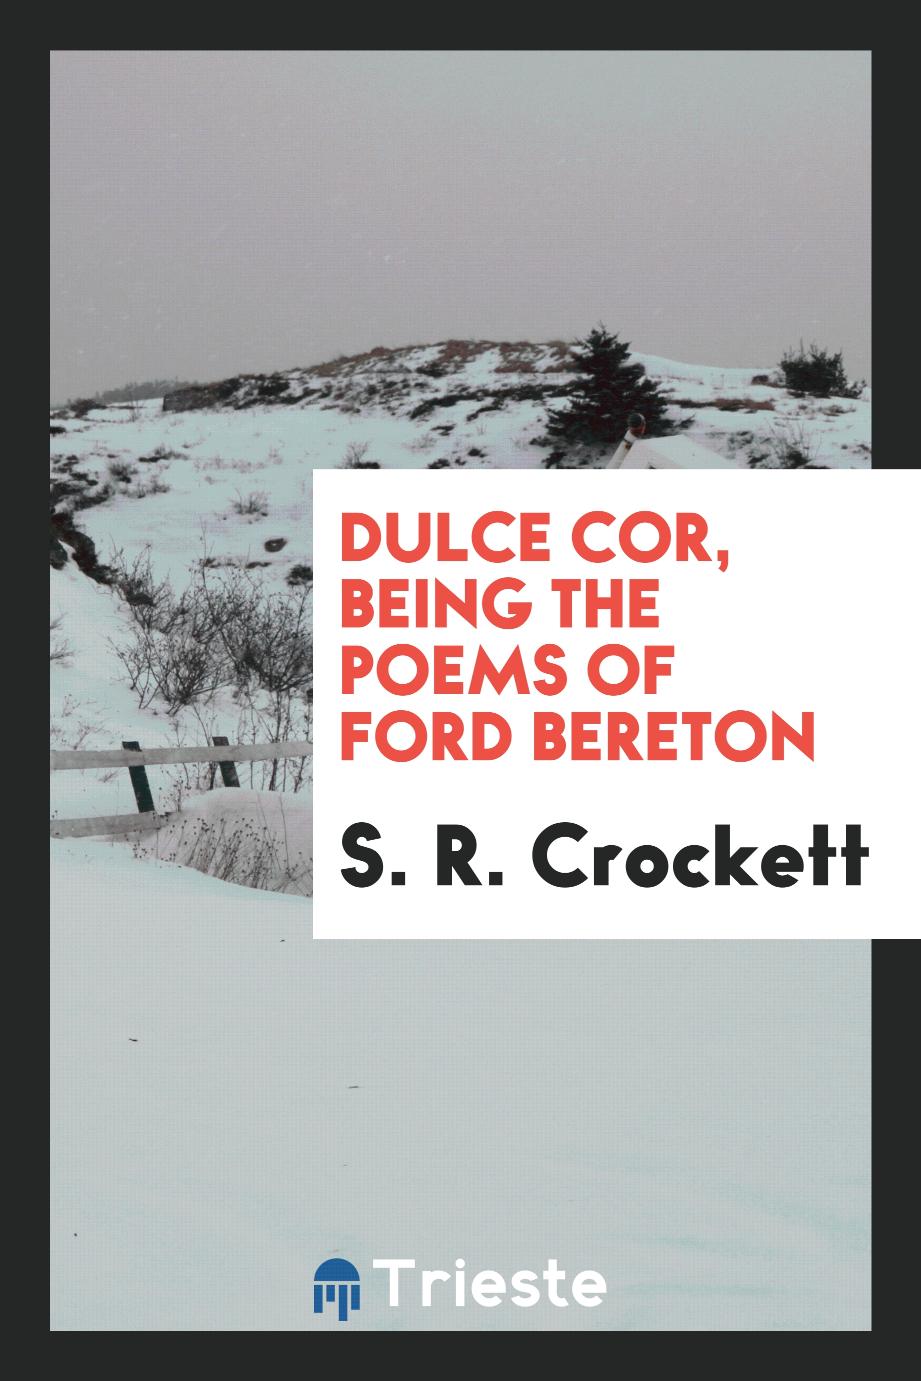 Dulce cor, being the poems of Ford Bereton